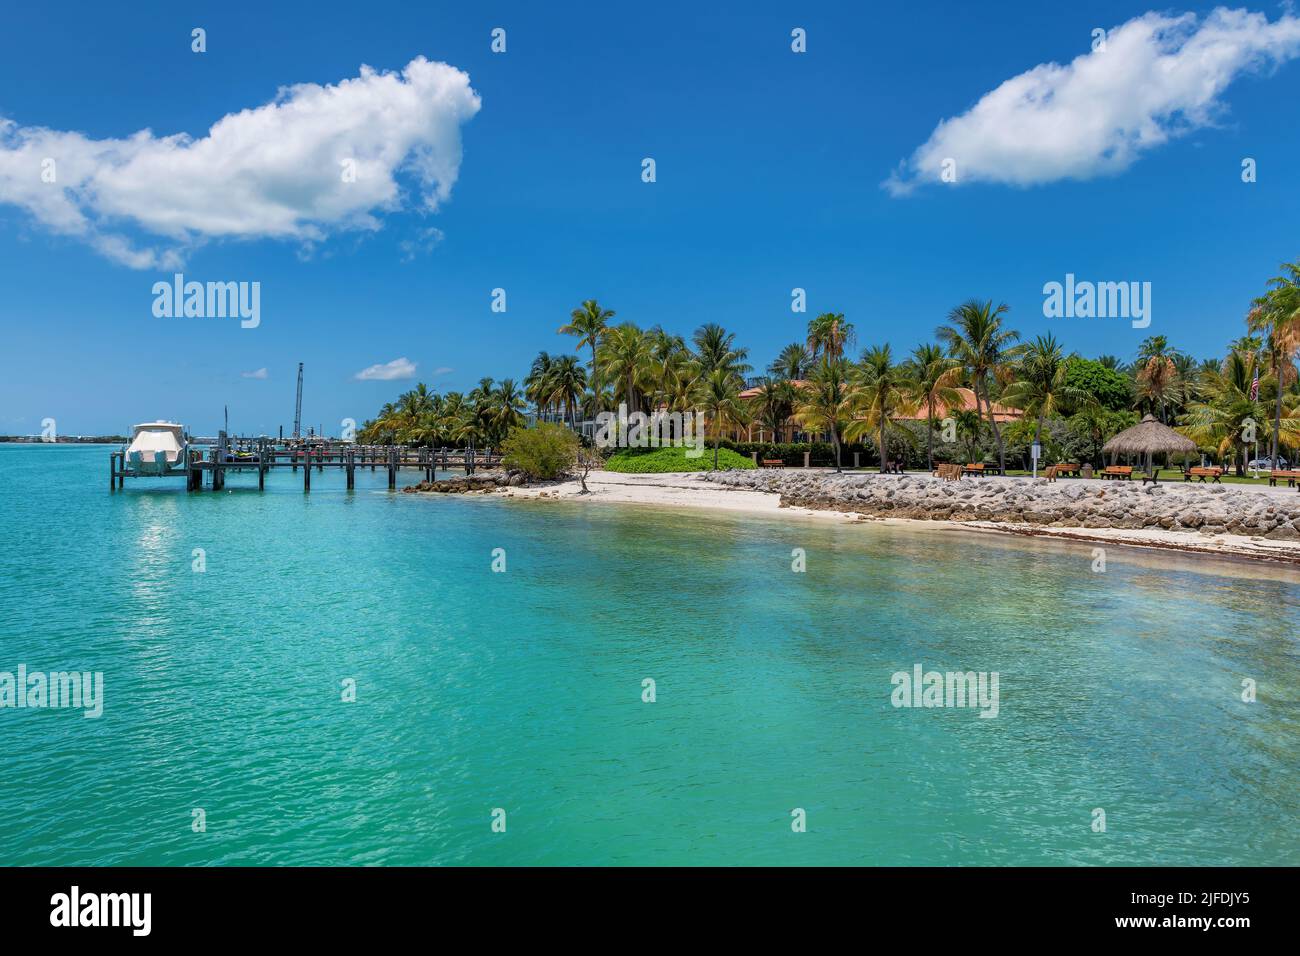 Sunset Beach and pier in beach state park and palm trees in Florida Keys Stock Photo